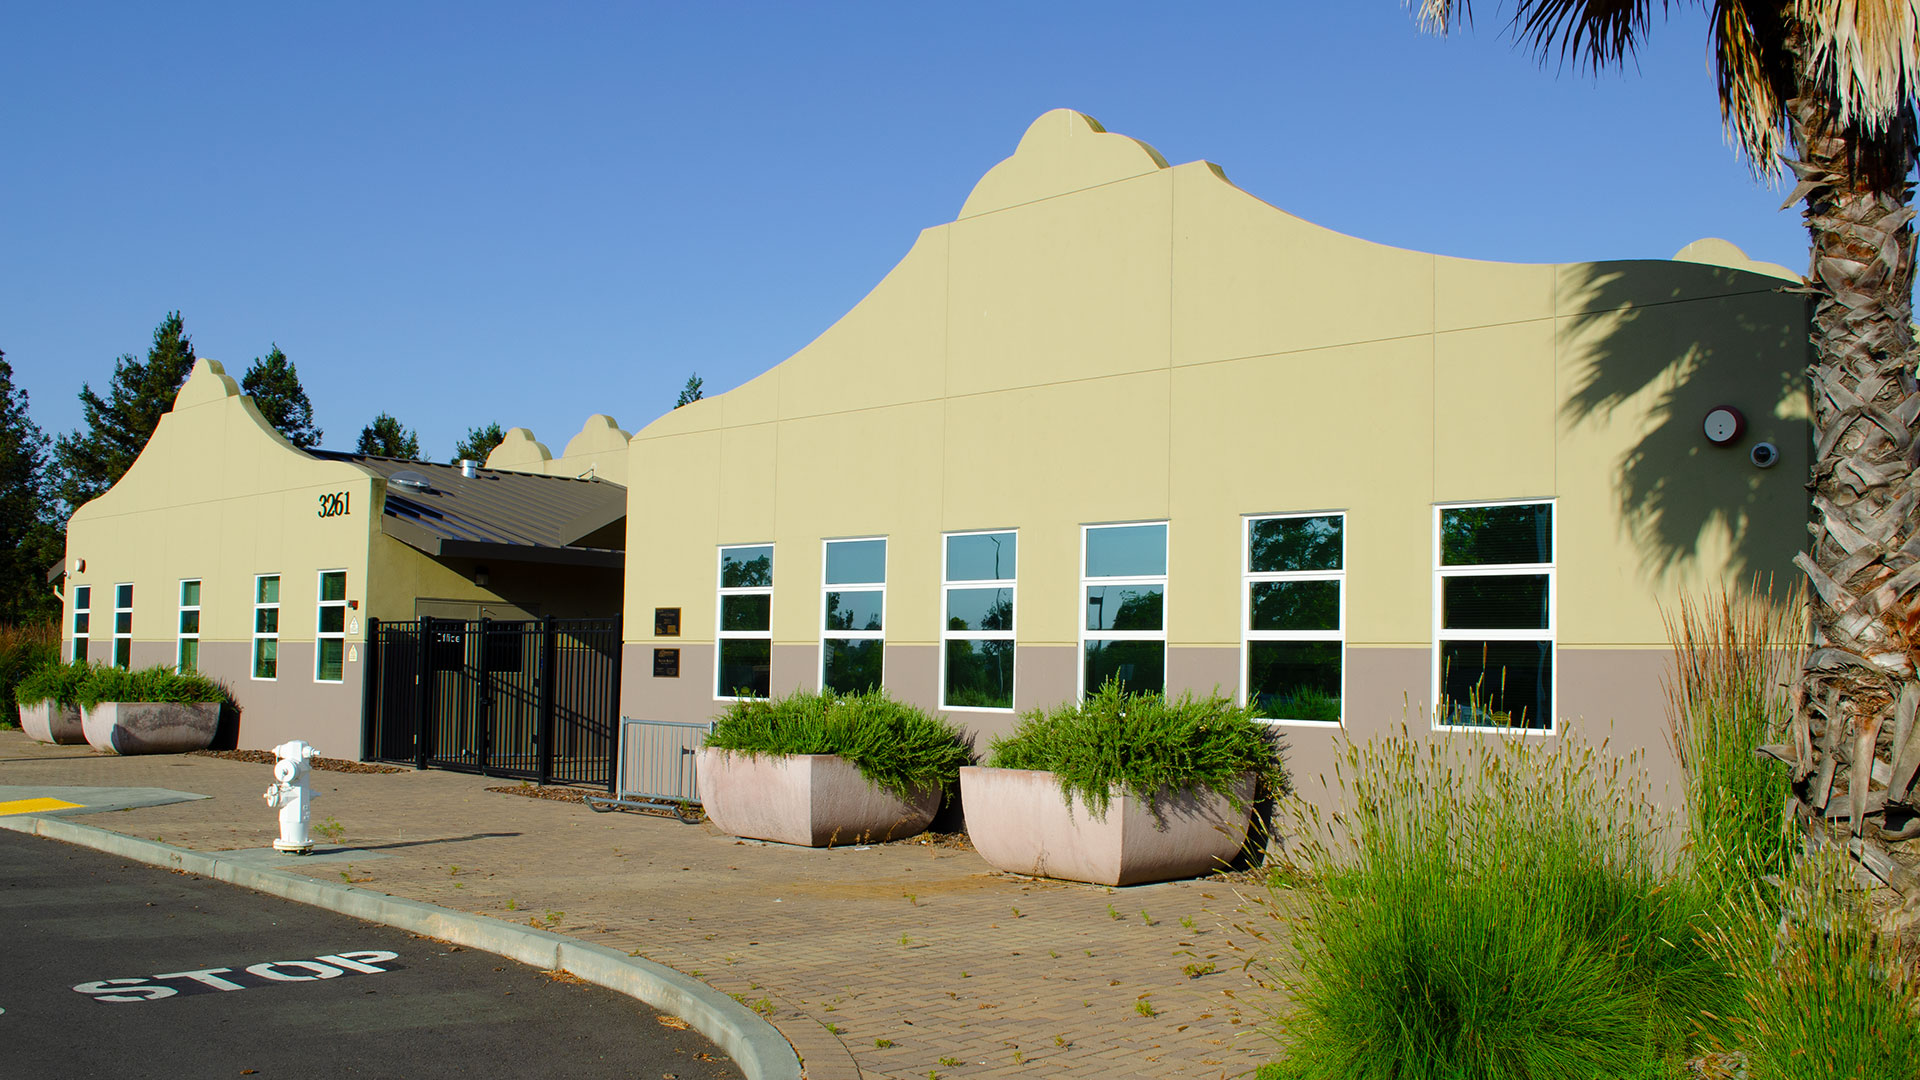 Entrance of school, with mission-style rooflines, beige walls, and gray wainscot. Front entrance is gated.